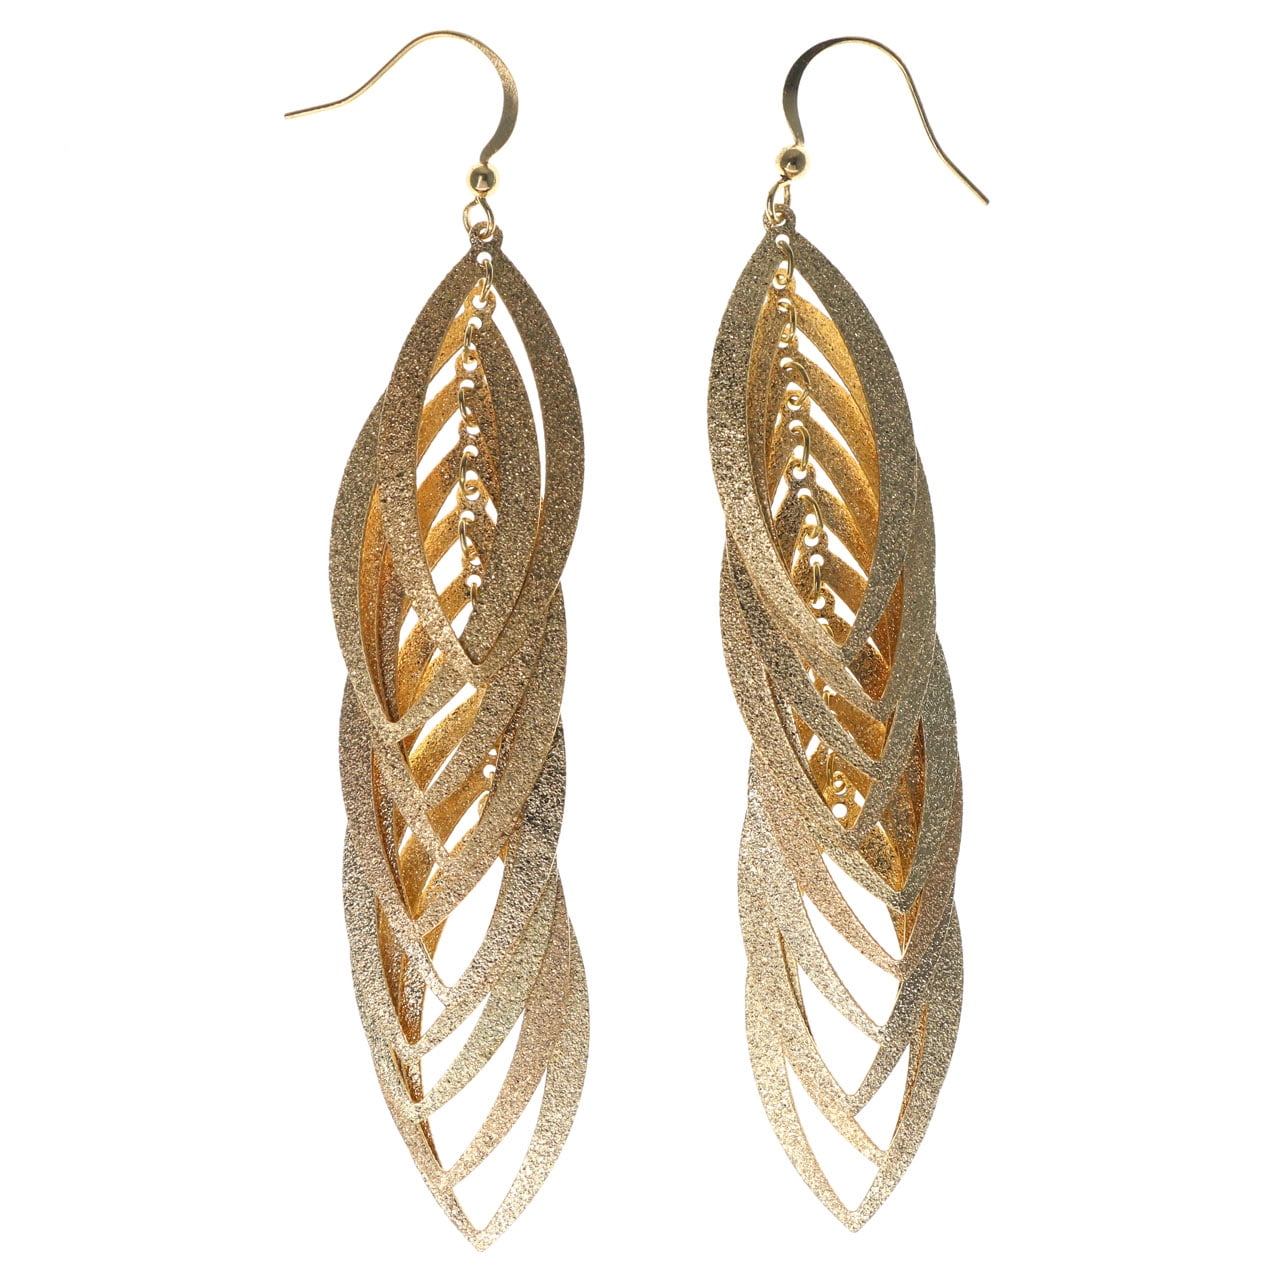 Gold-Tone Layered Leaf Shaped French Hook Dangle Earrings For Women ...